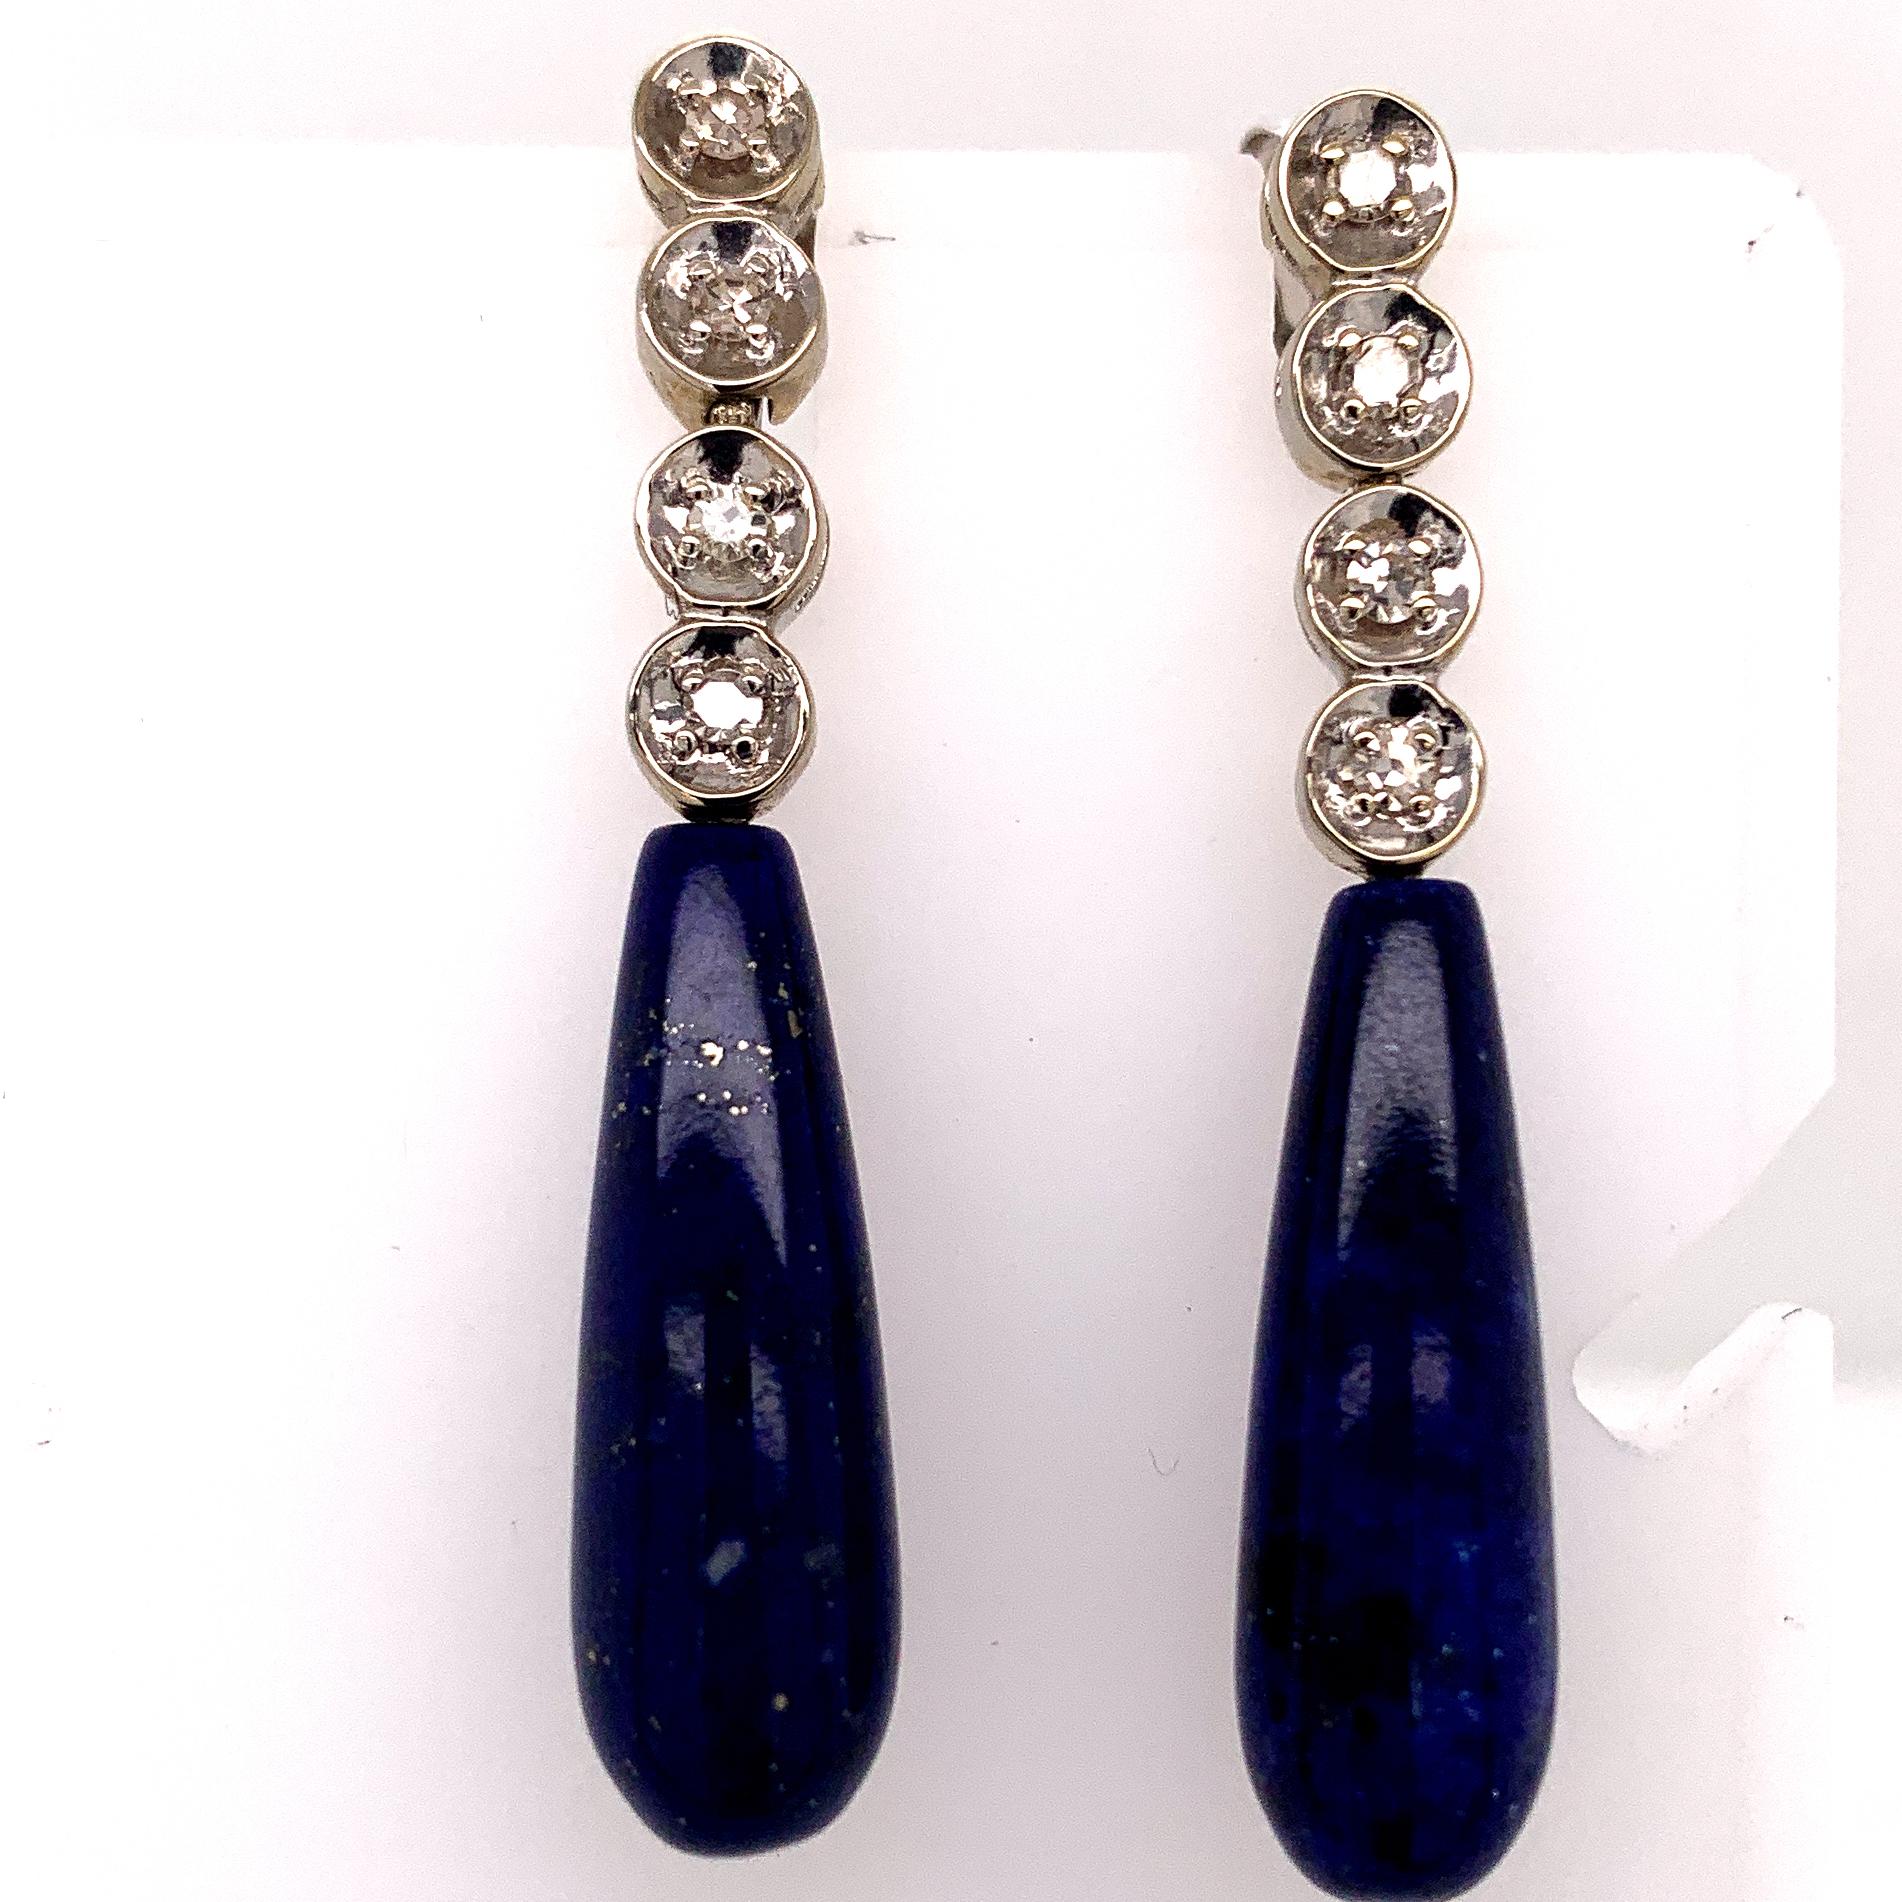 Striking lapis and diamond drop earrings.  Suspended from four bezel-set brilliant diamonds.  Set in 14K yellow gold.  1 1/2